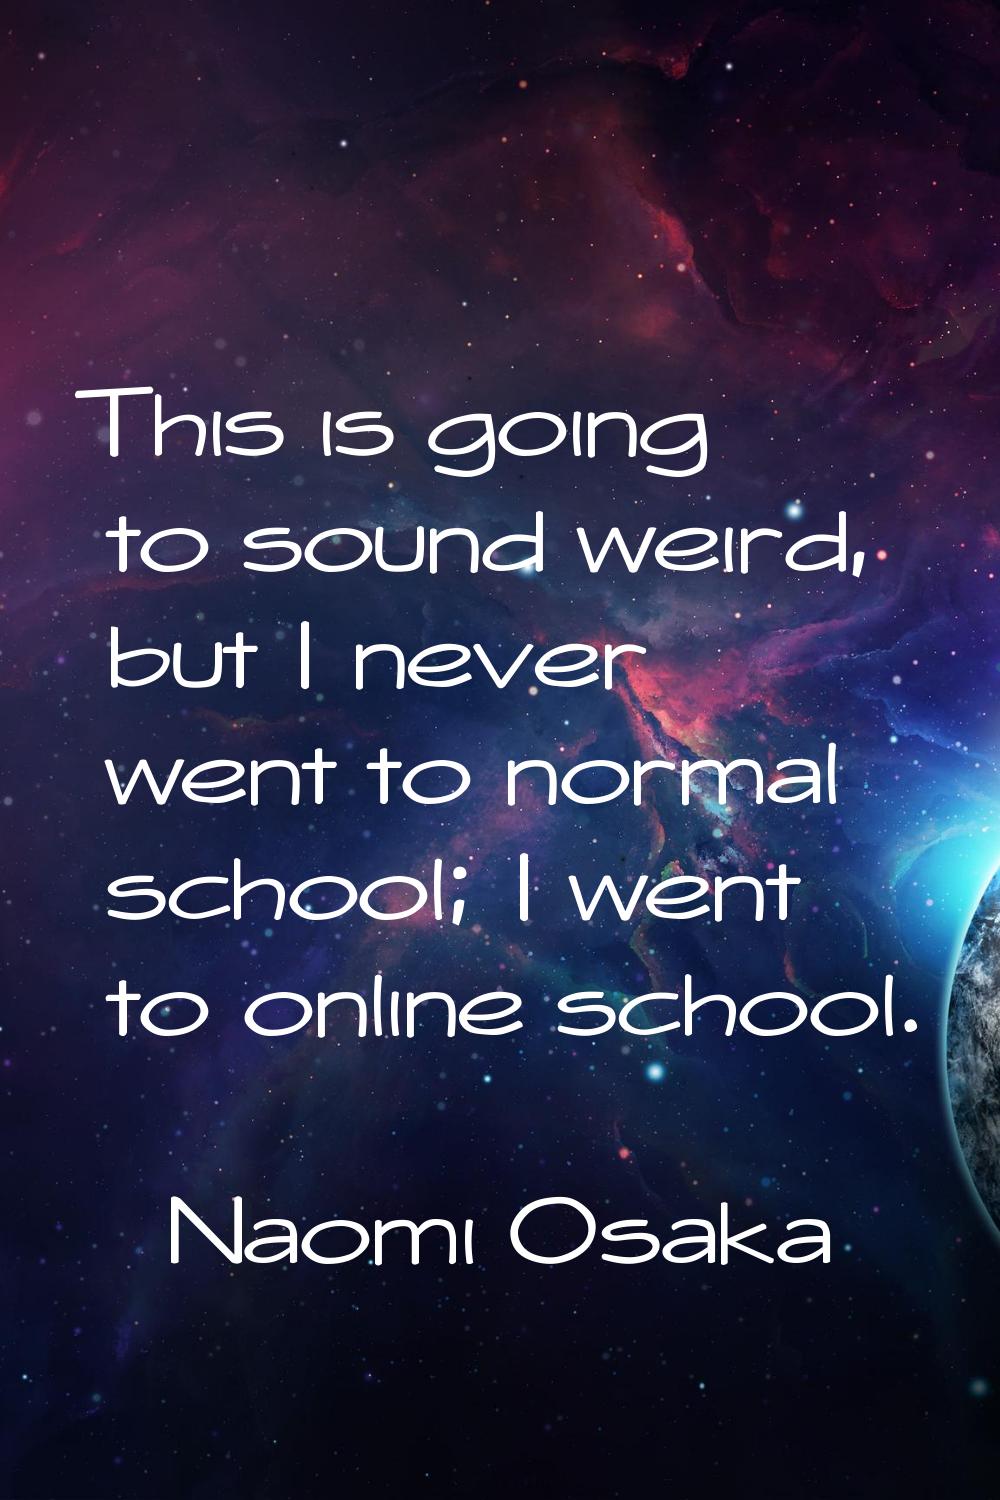 This is going to sound weird, but I never went to normal school; I went to online school.